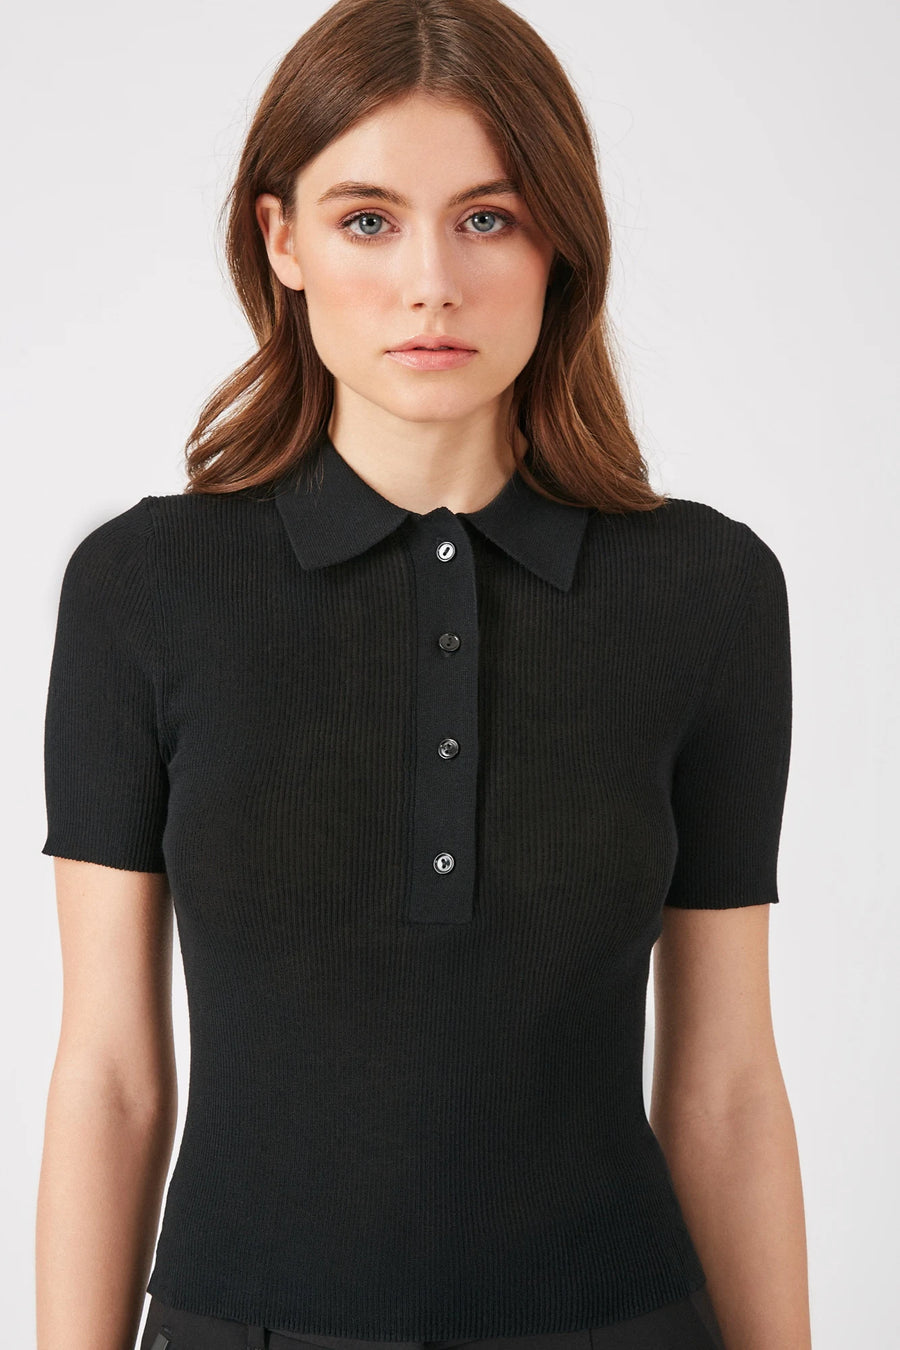 The Emma luxe polo in black by Greyven